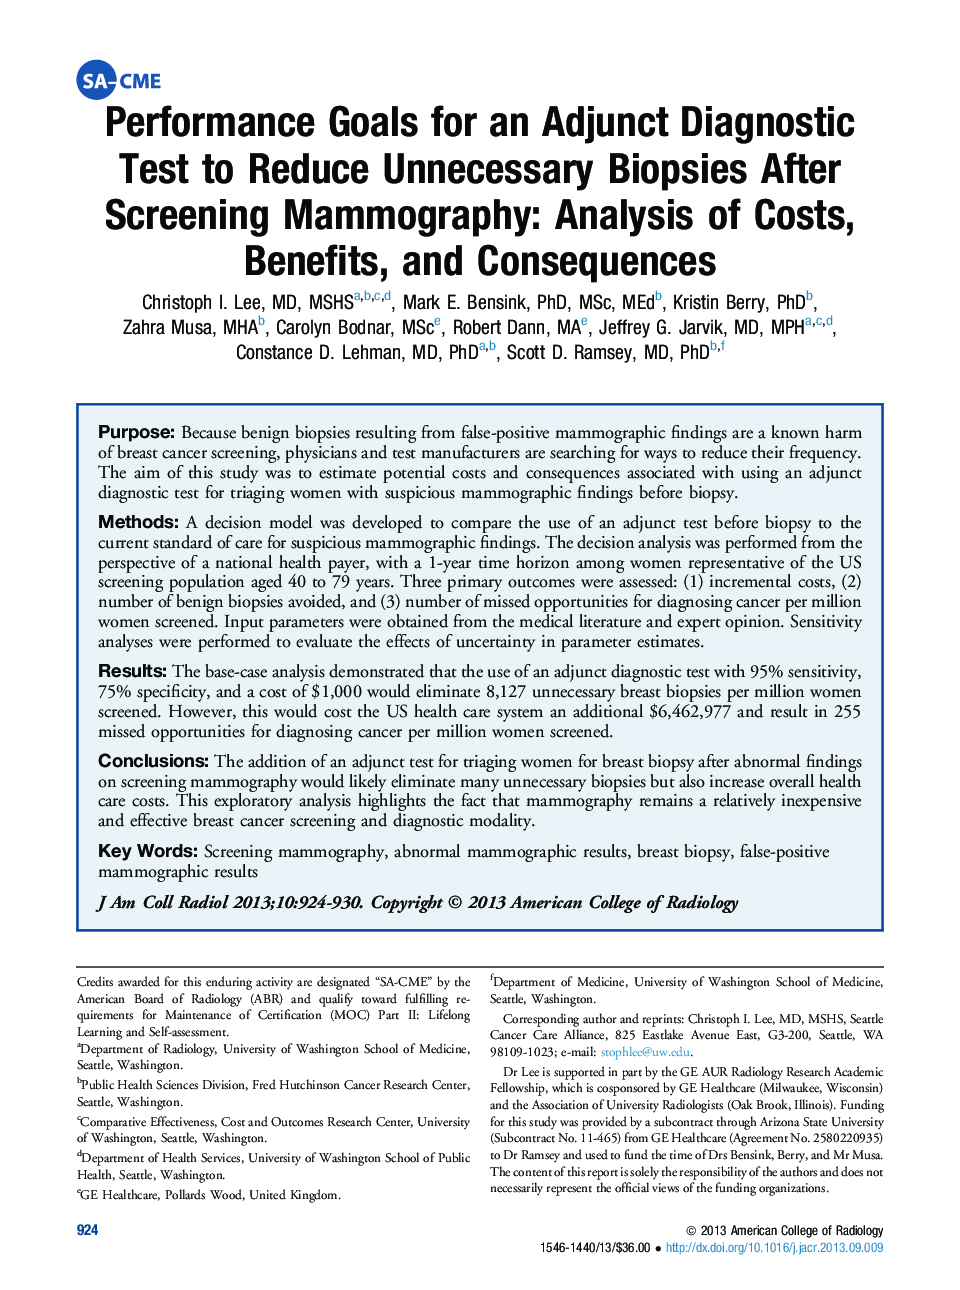 Performance Goals for an Adjunct Diagnostic Test to Reduce Unnecessary Biopsies After Screening Mammography: Analysis of Costs, Benefits, and Consequences